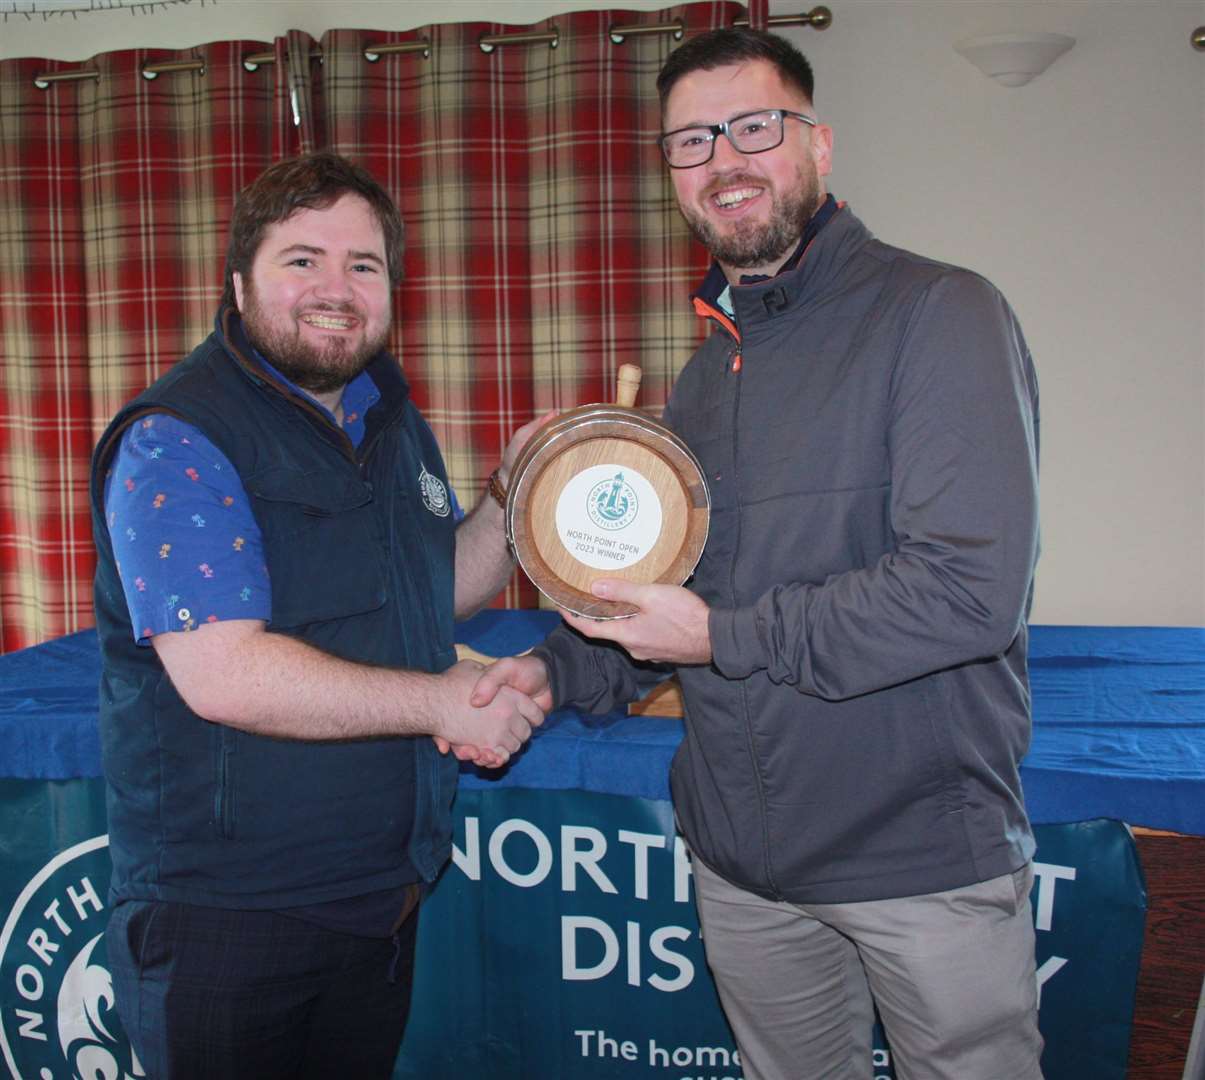 Bryan Suttar (right) of Thurso Golf Club receiving the scratch prize for the recent North Point Distillery Open from Struan Mackie, co-founder of North Point Distillery.